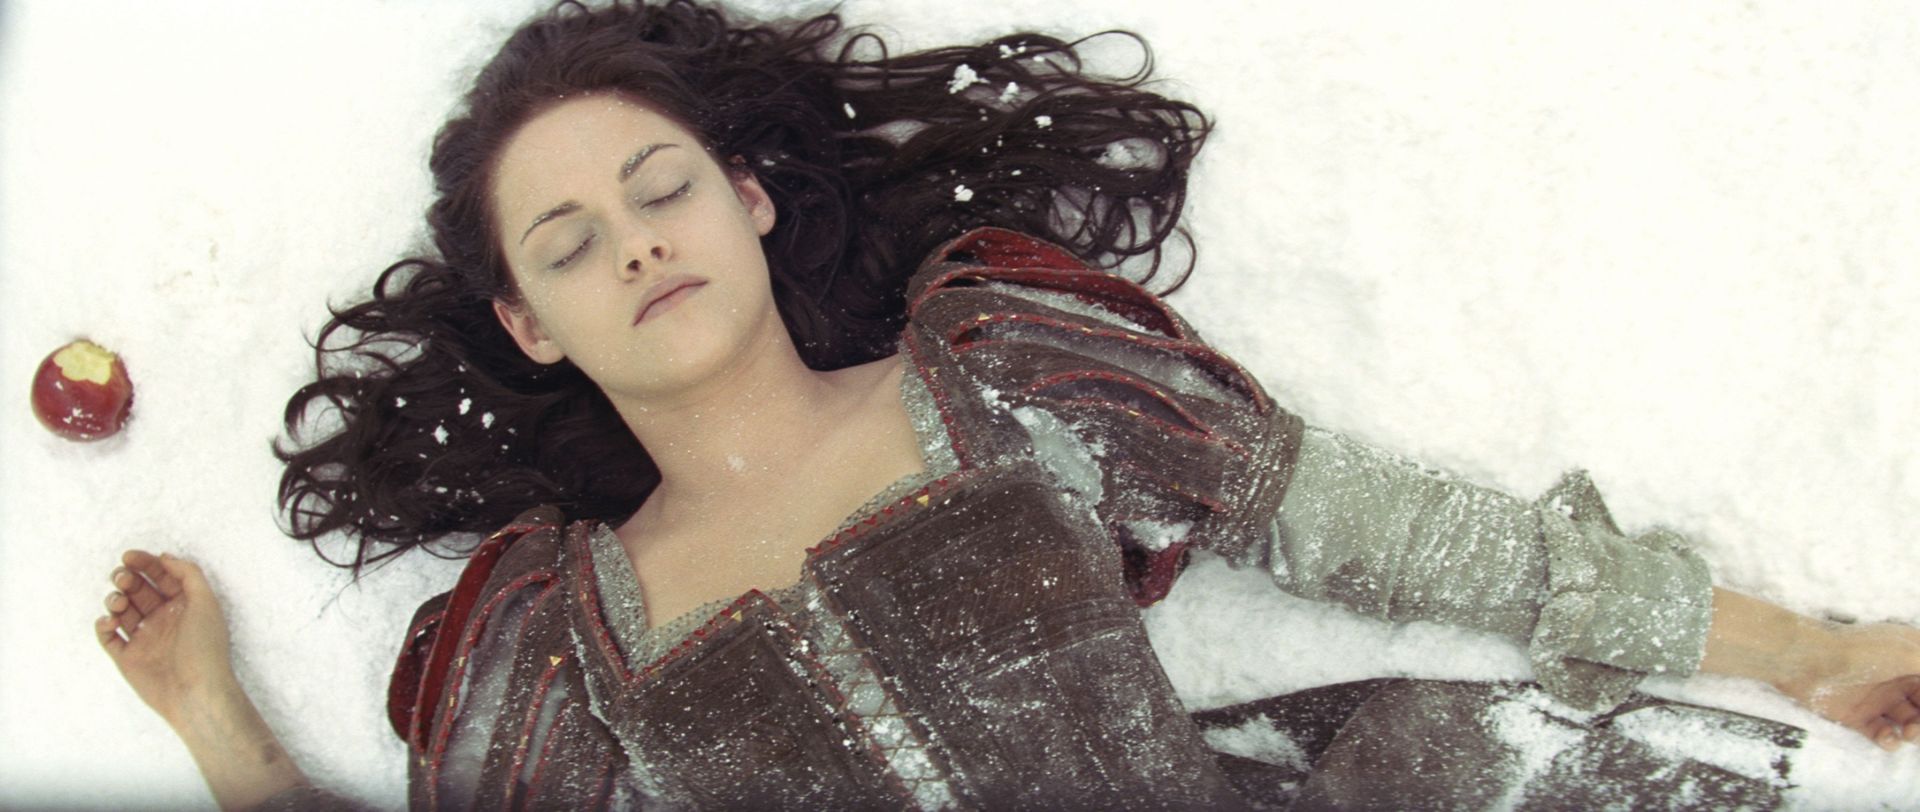 Snow White and the Huntsman Teen Vogue Photos #3